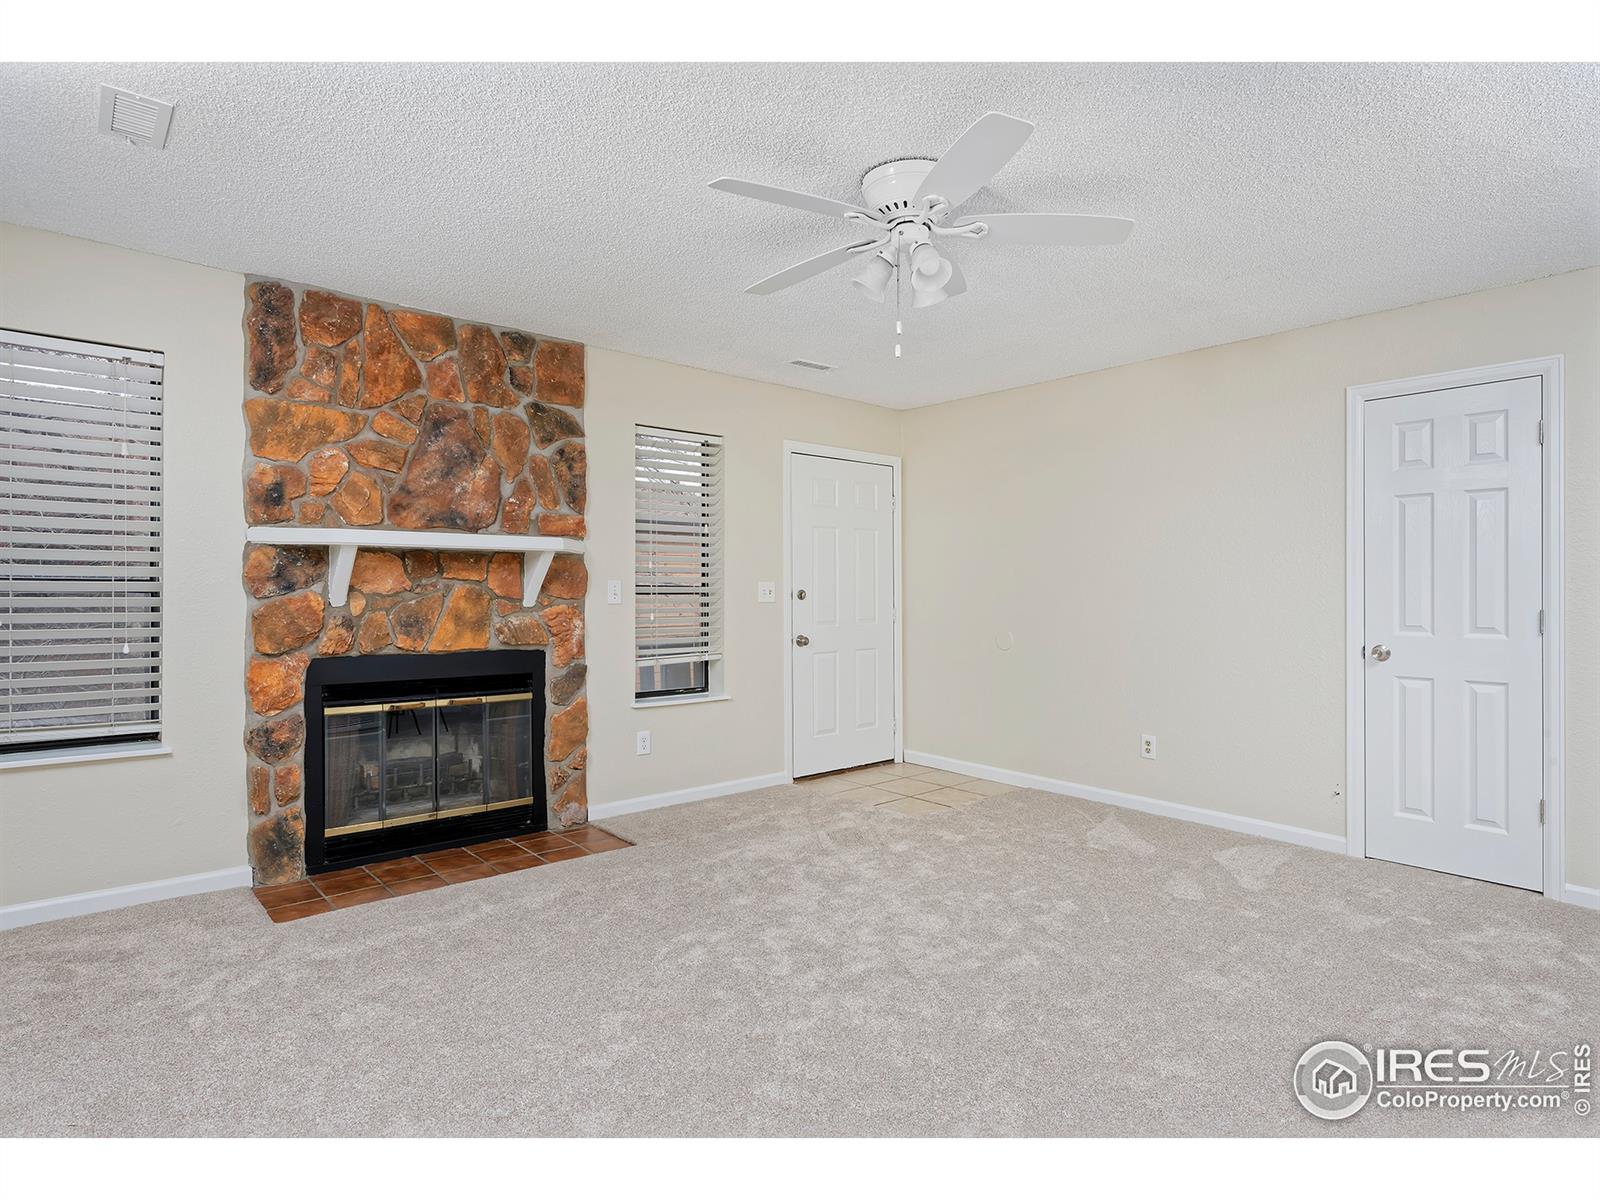 9446 89th, Westminster, CO